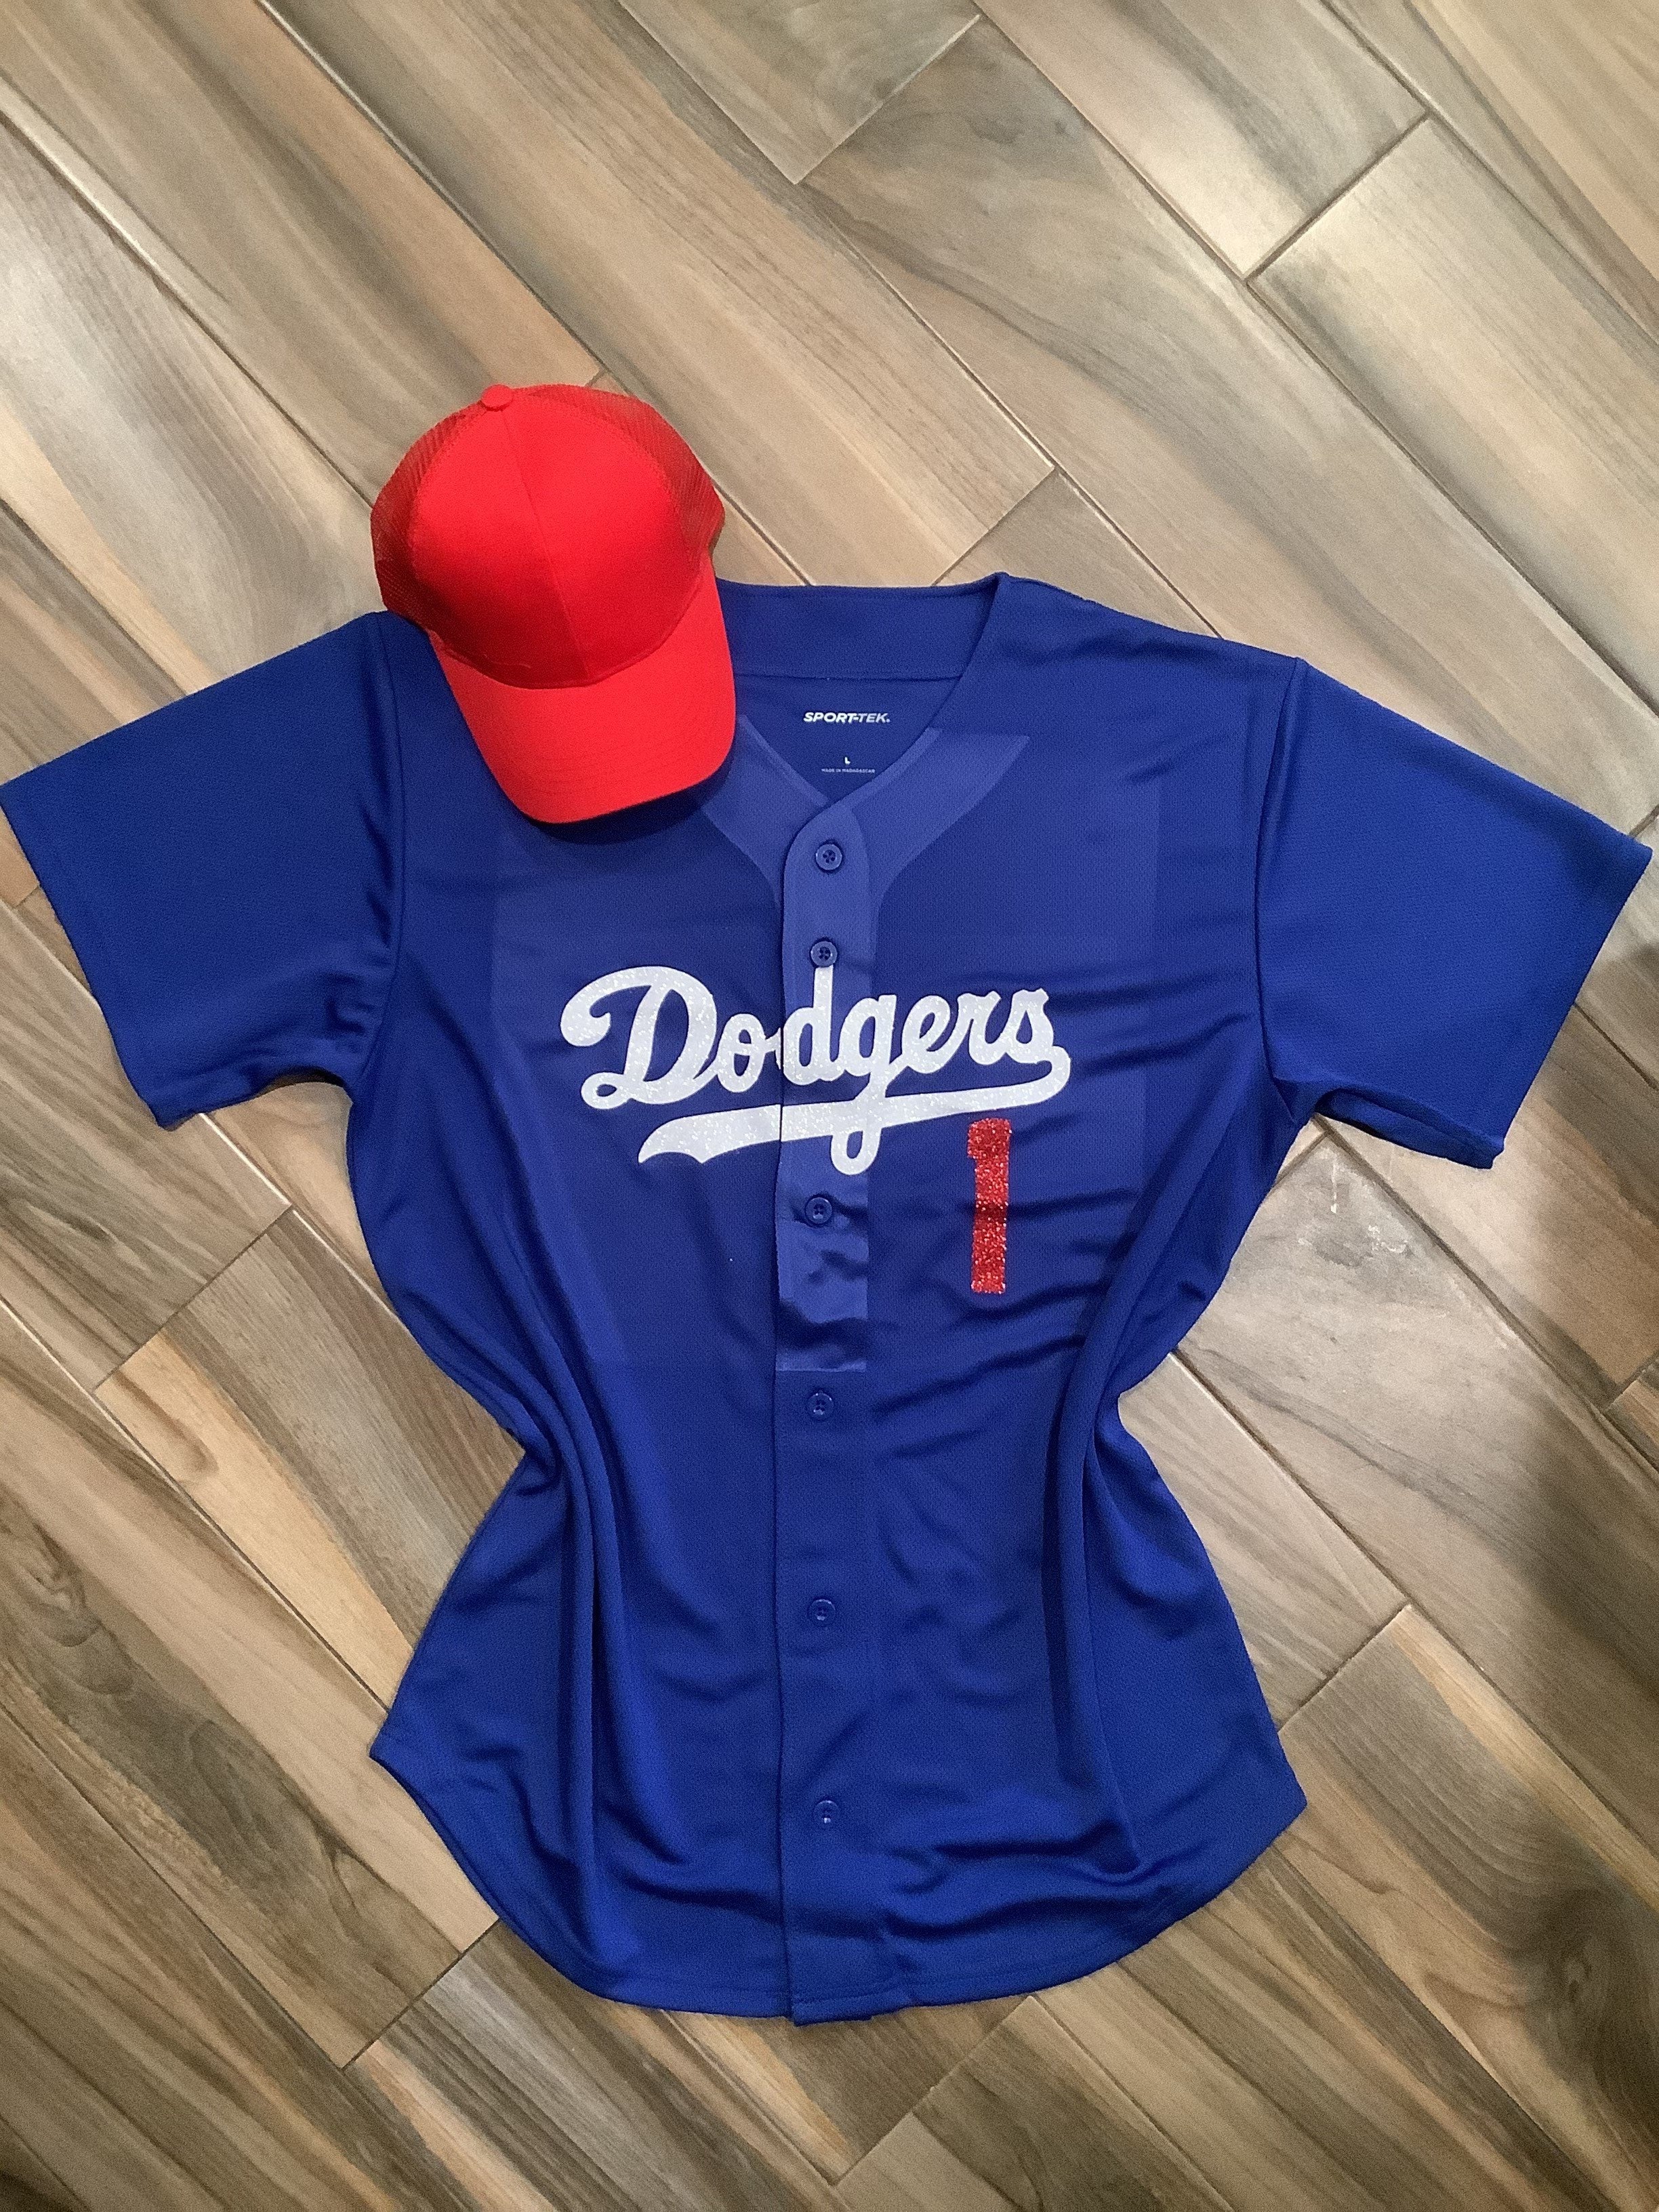 white dodgers jersey outfit women